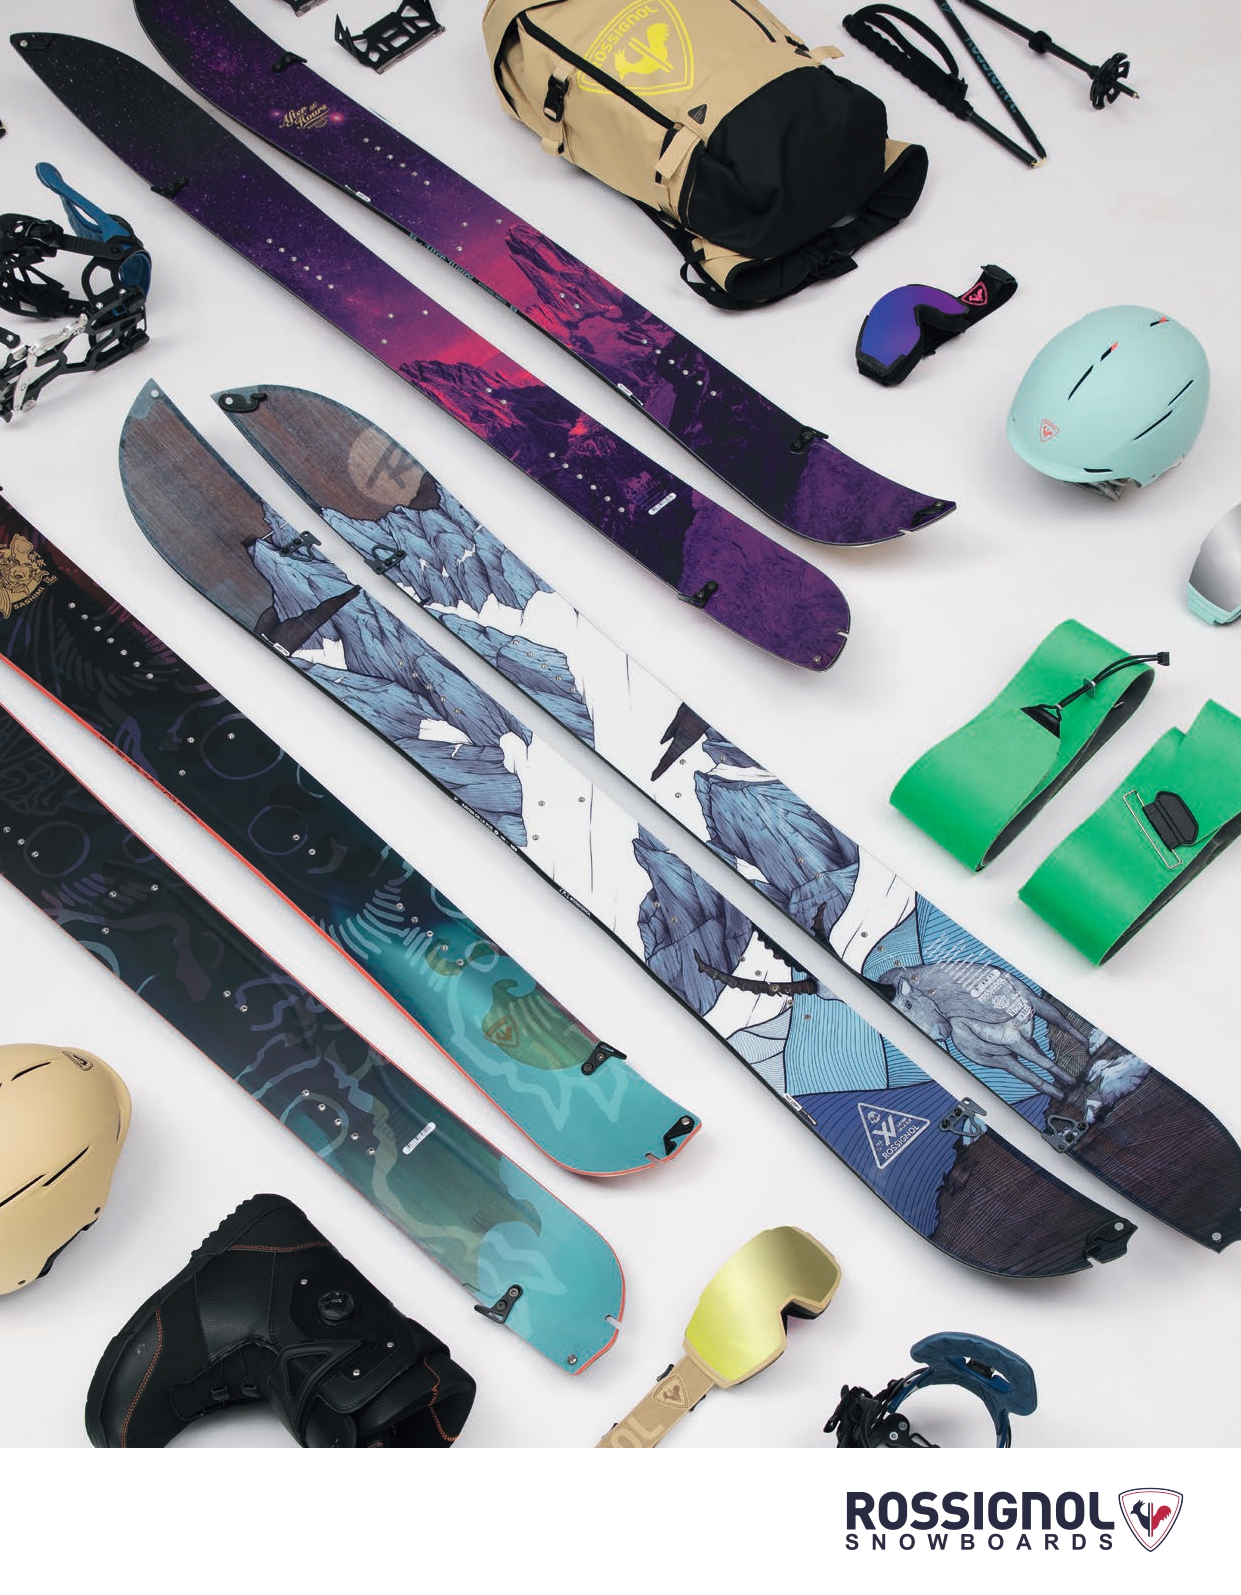 105 rossignol snowboards and goggles